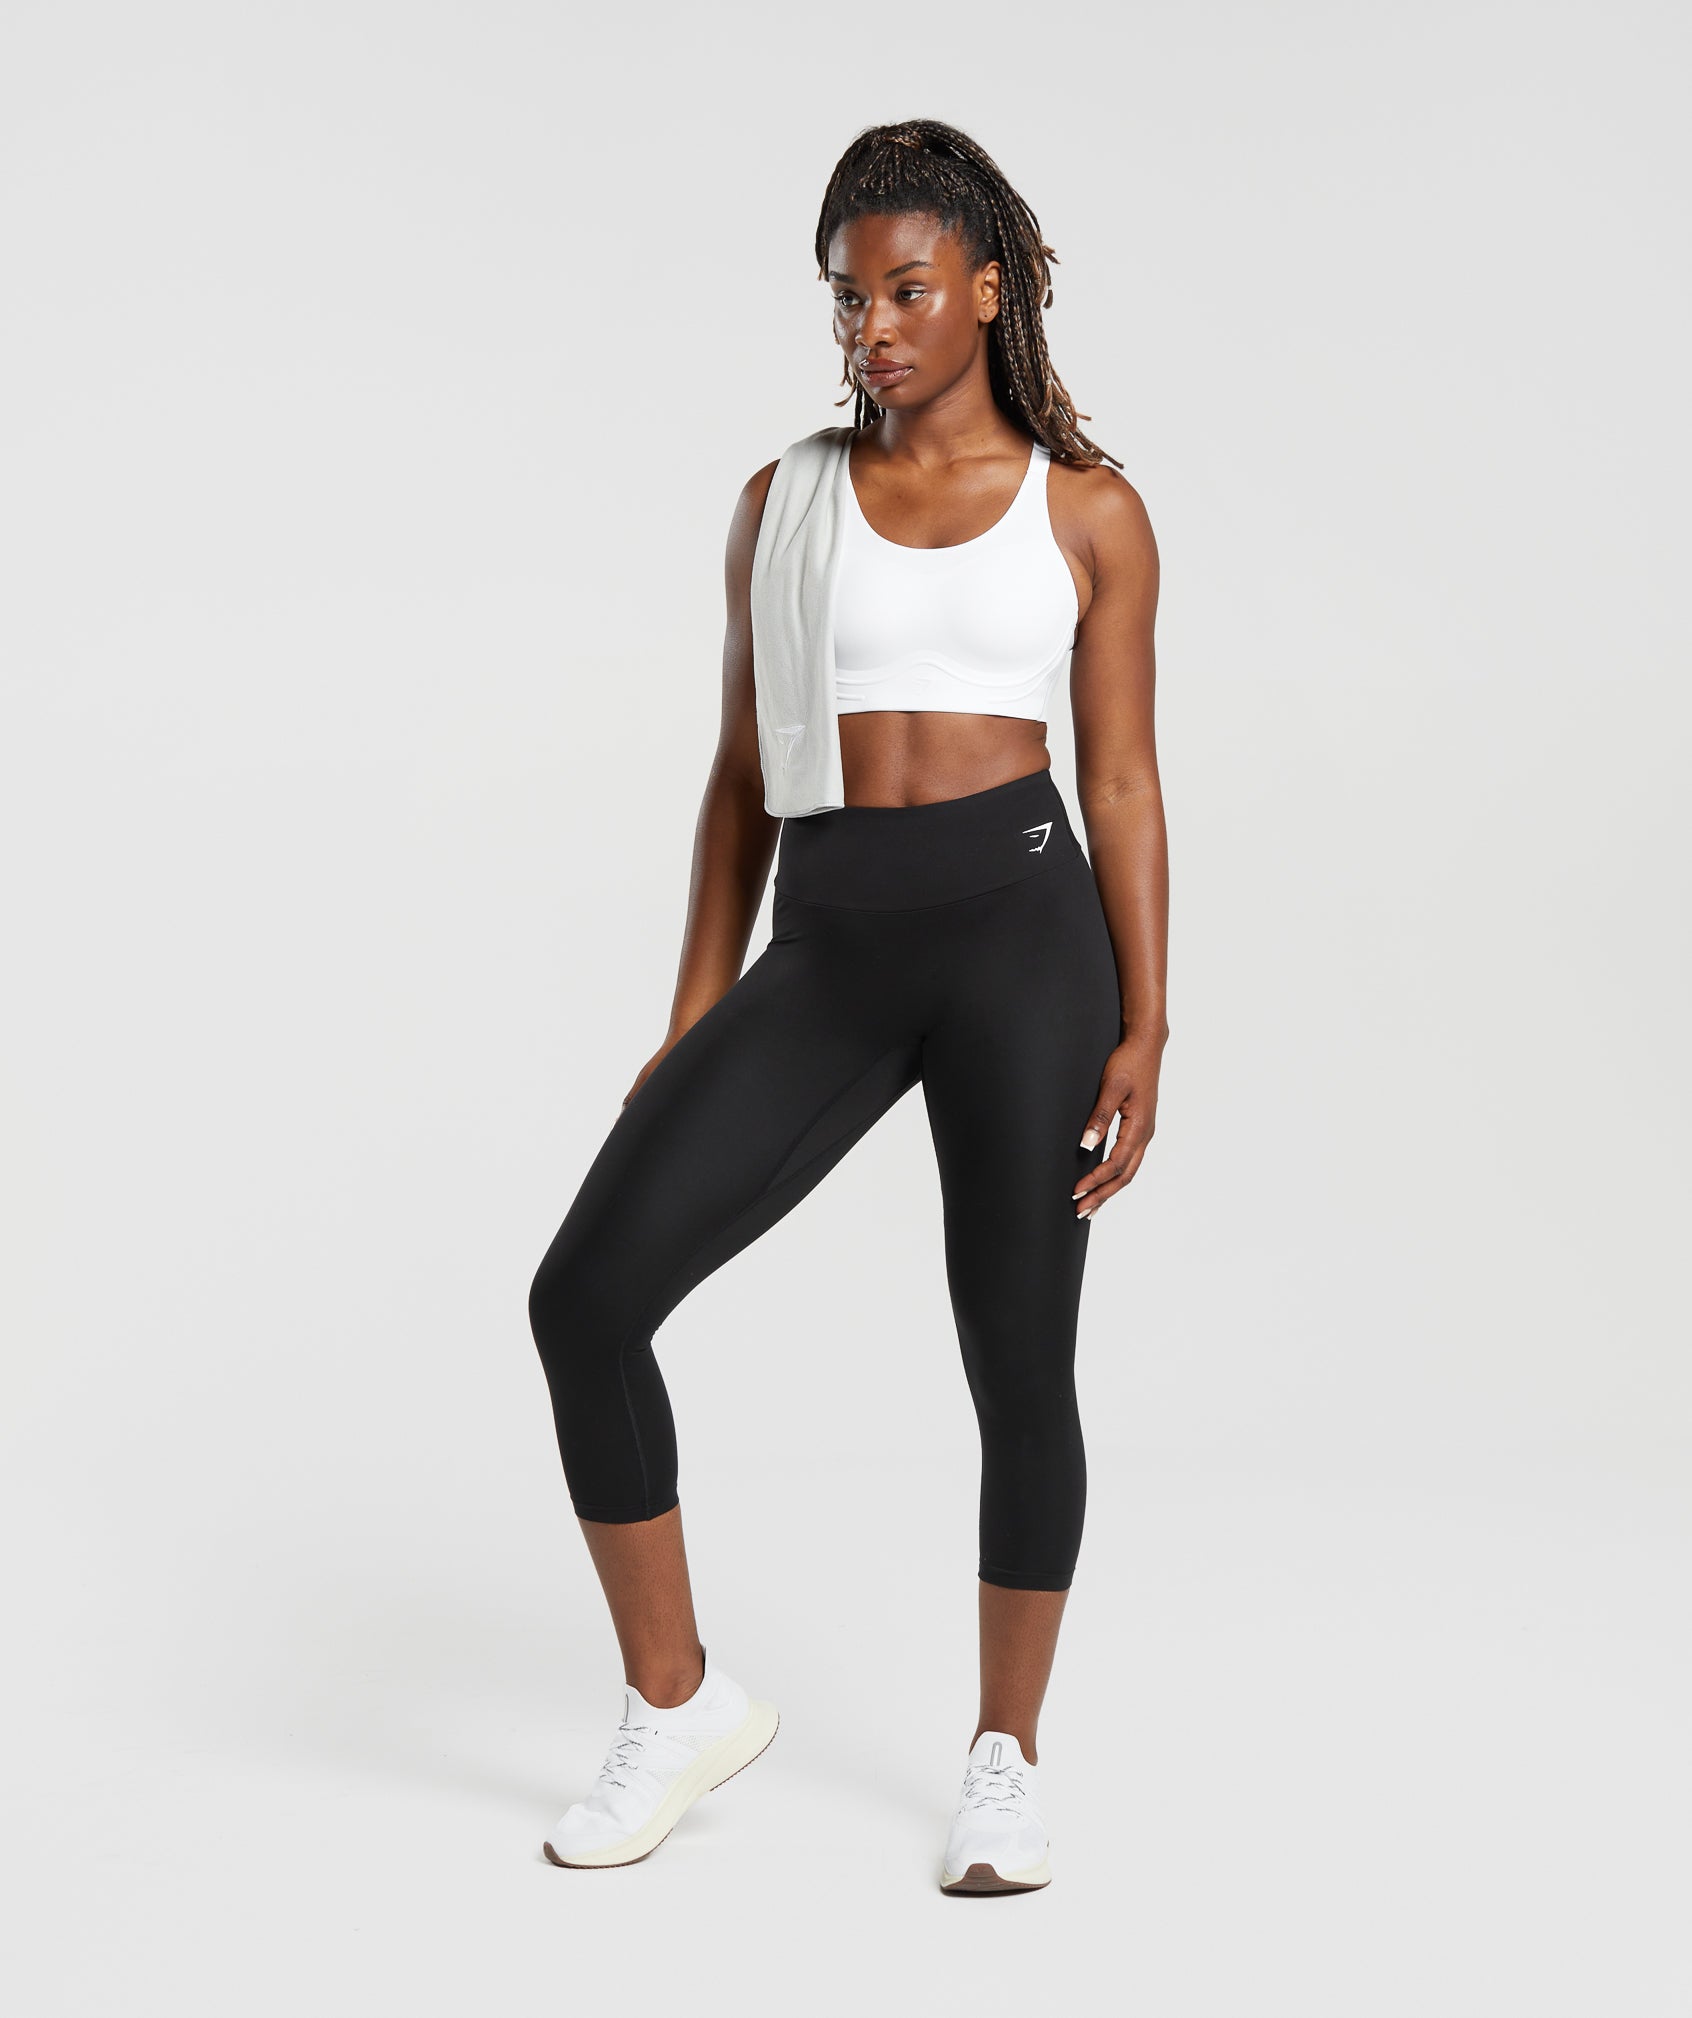 The perfect workout outfit consists of the Dynamic leggings and Cross Back  Sports Bra from the new Gymshark by Nik…